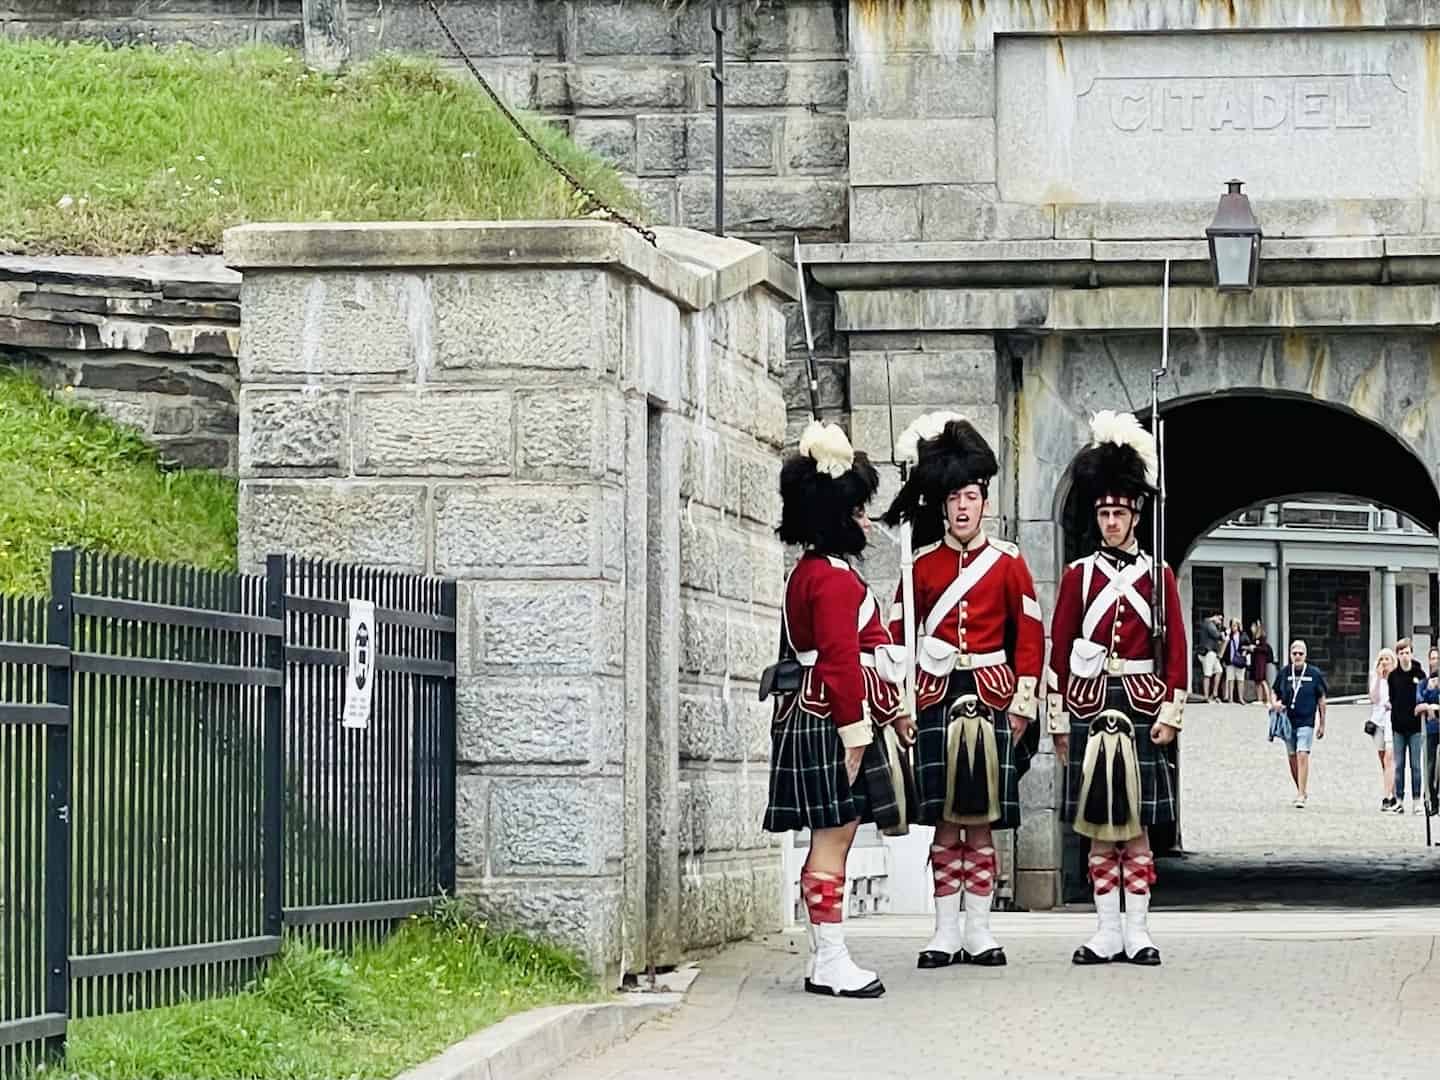 Three soldiers participate in the changing of the guard at the Halifax Citadel.